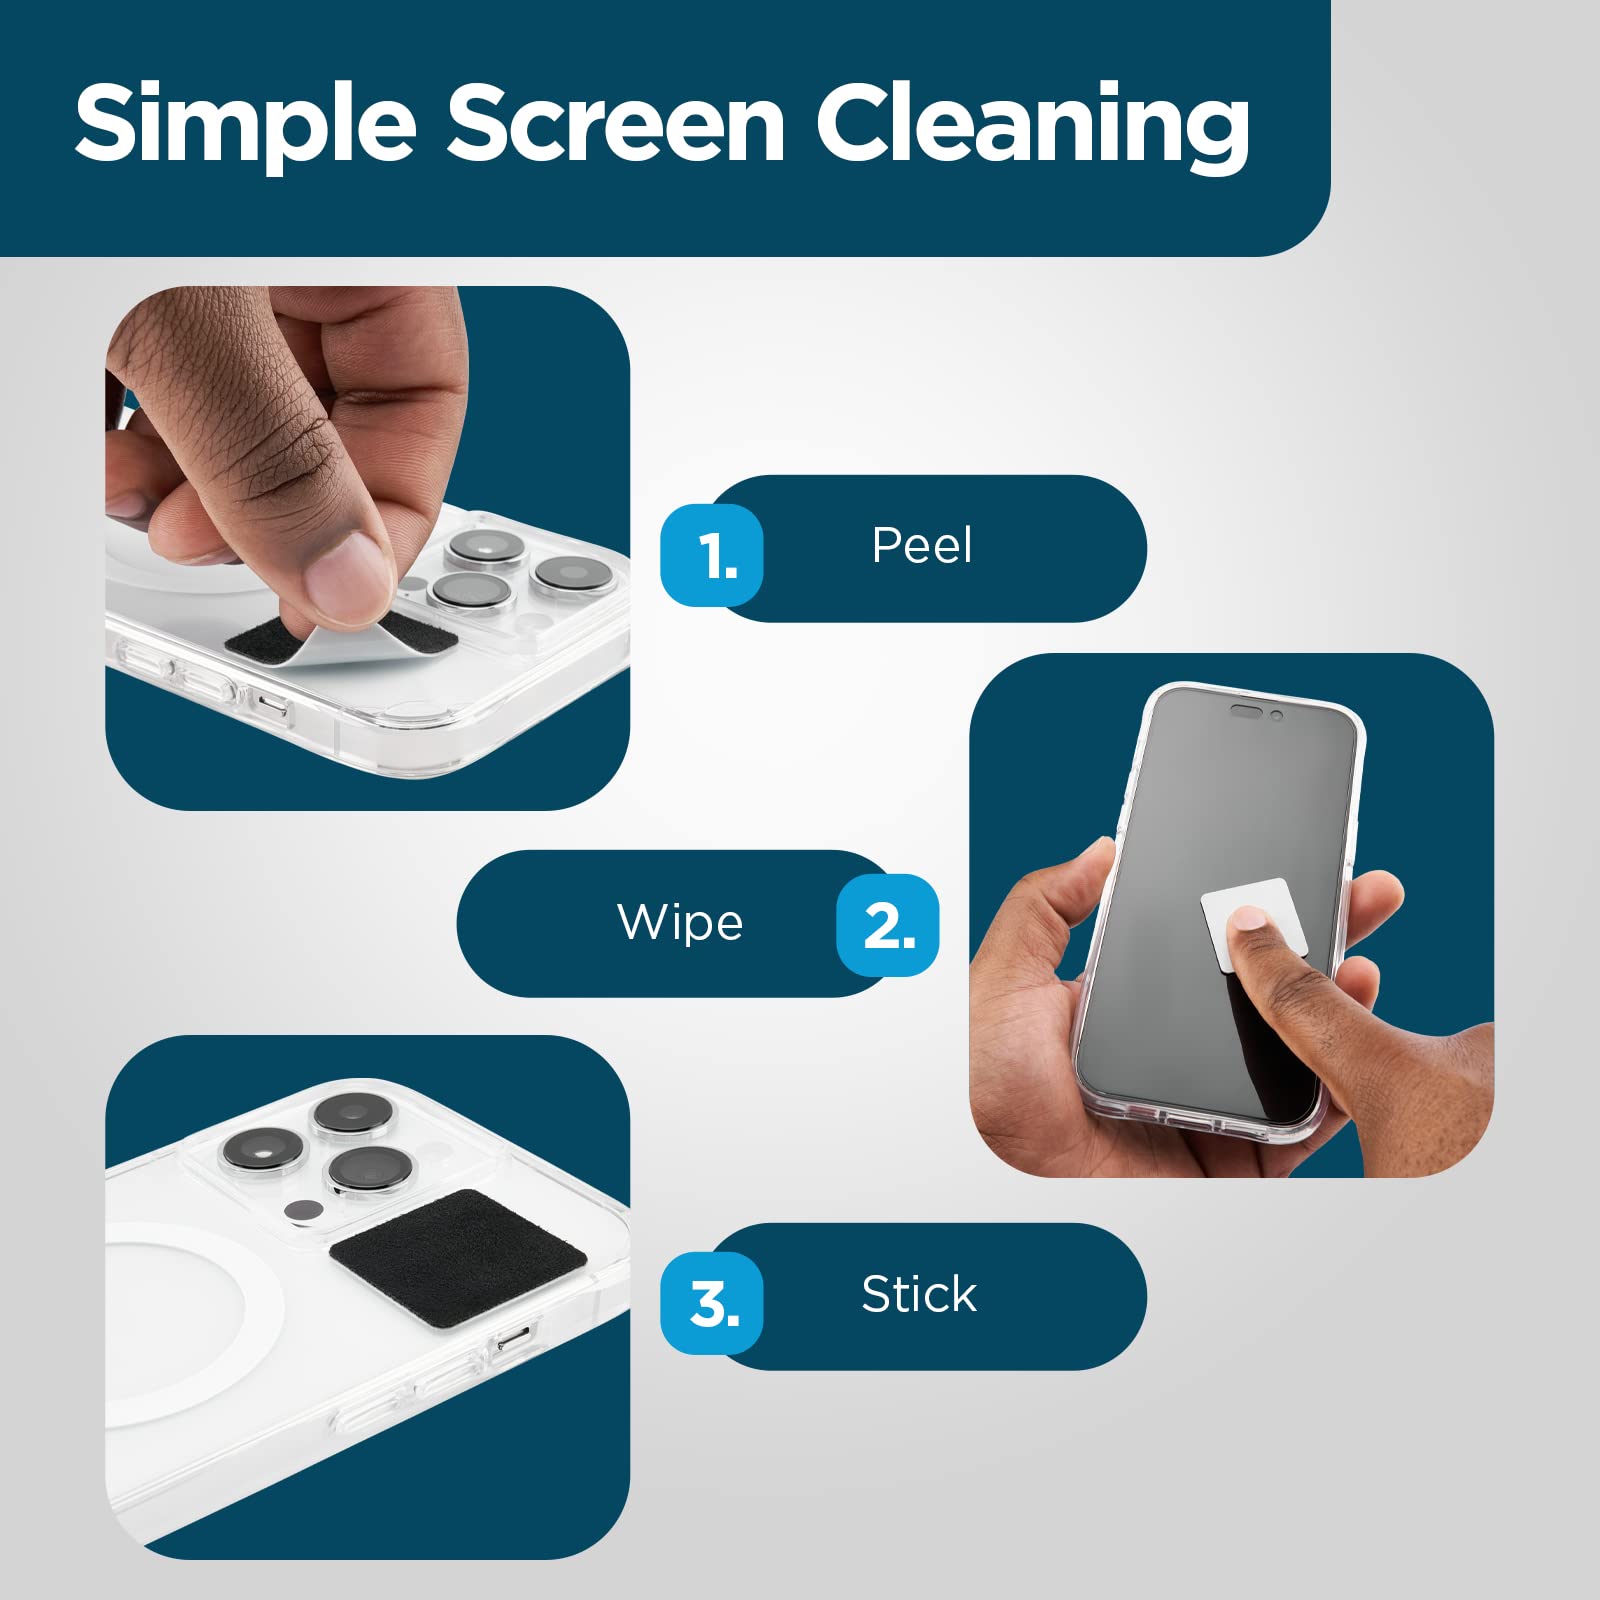 Case-Mate Screen Cleaner Squares - [3 Pcs] Peel & Stick Reusable, Washable Microfiber Cleaning Cloth/Wipes for iPhone, Laptop, iPad, Computer Screens, Camera Lenses, EV Car Screen & Other Electronics